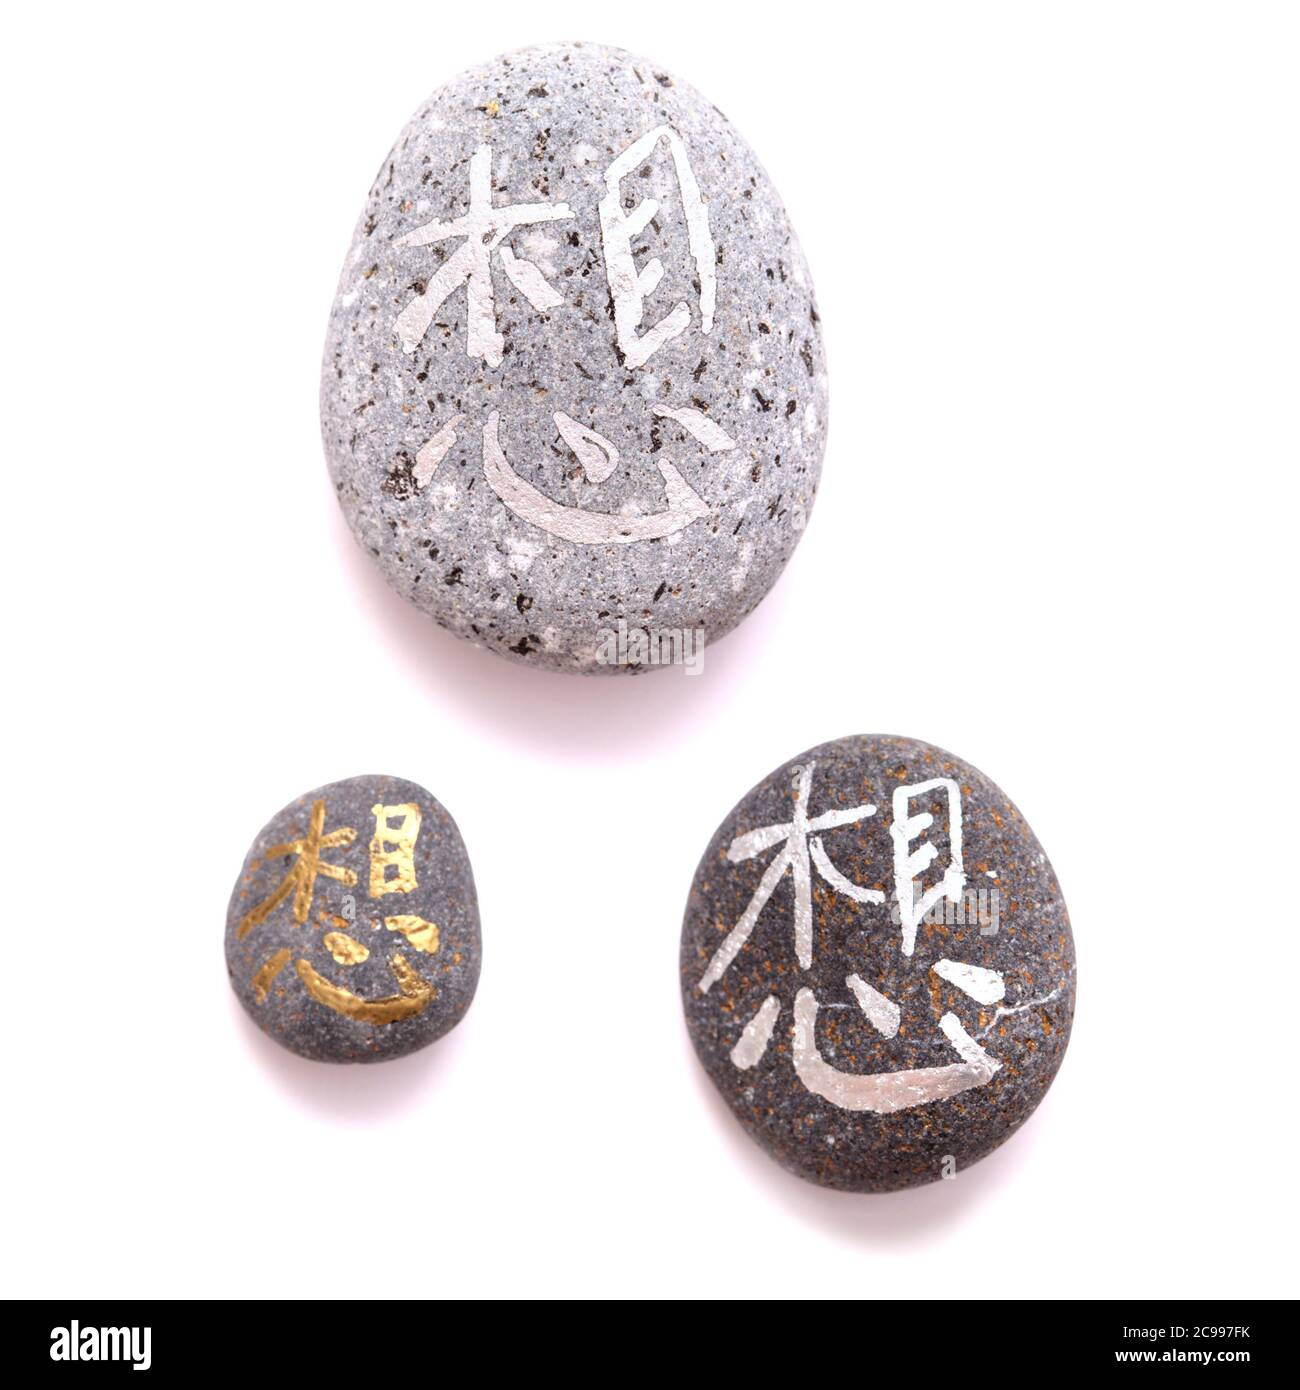 Chinese Or Japanese Symbol Meaning Think Or Miss Painted On Volcanic Pebbles In Metallic Paint Stock Photo Alamy